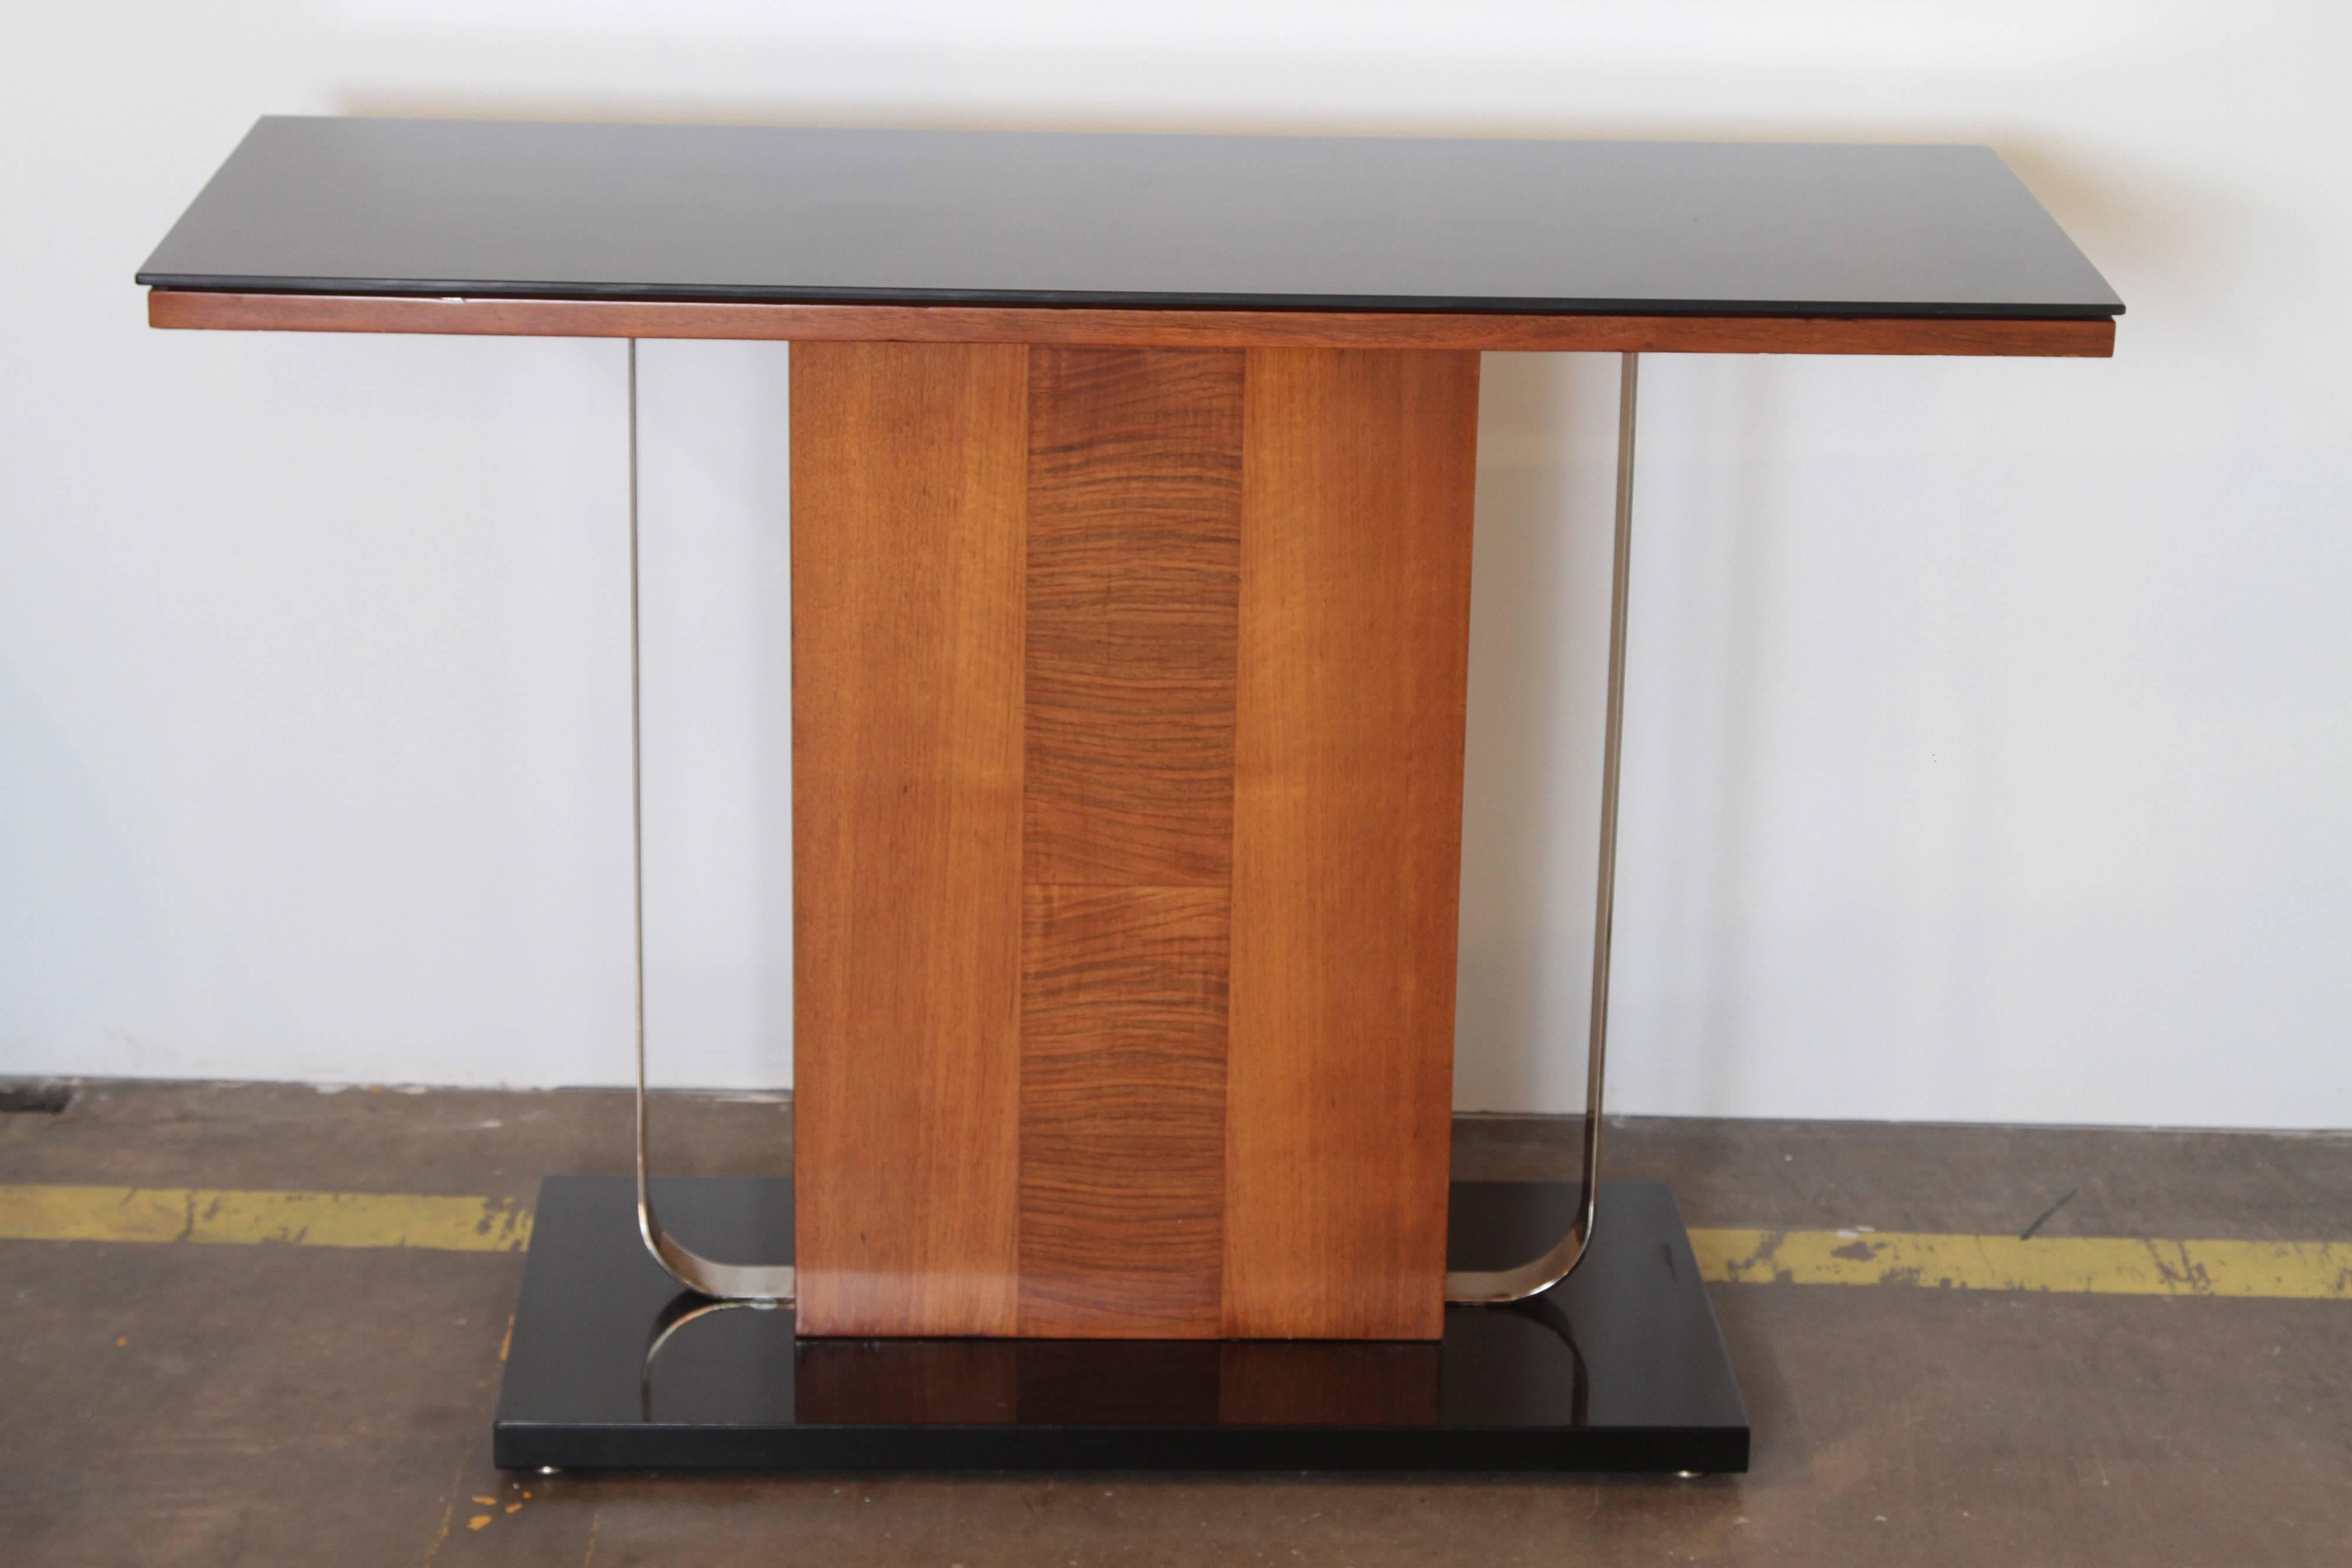 Art Deco Machine Age Console / Entry / Sofa Table Chrome Vitrolite Bakelite Burl

Attractive mixed - media combination of exotic wood, vitrolite glass top, chromed flat bands and lacquered base.
Very good original condition, base possibly re